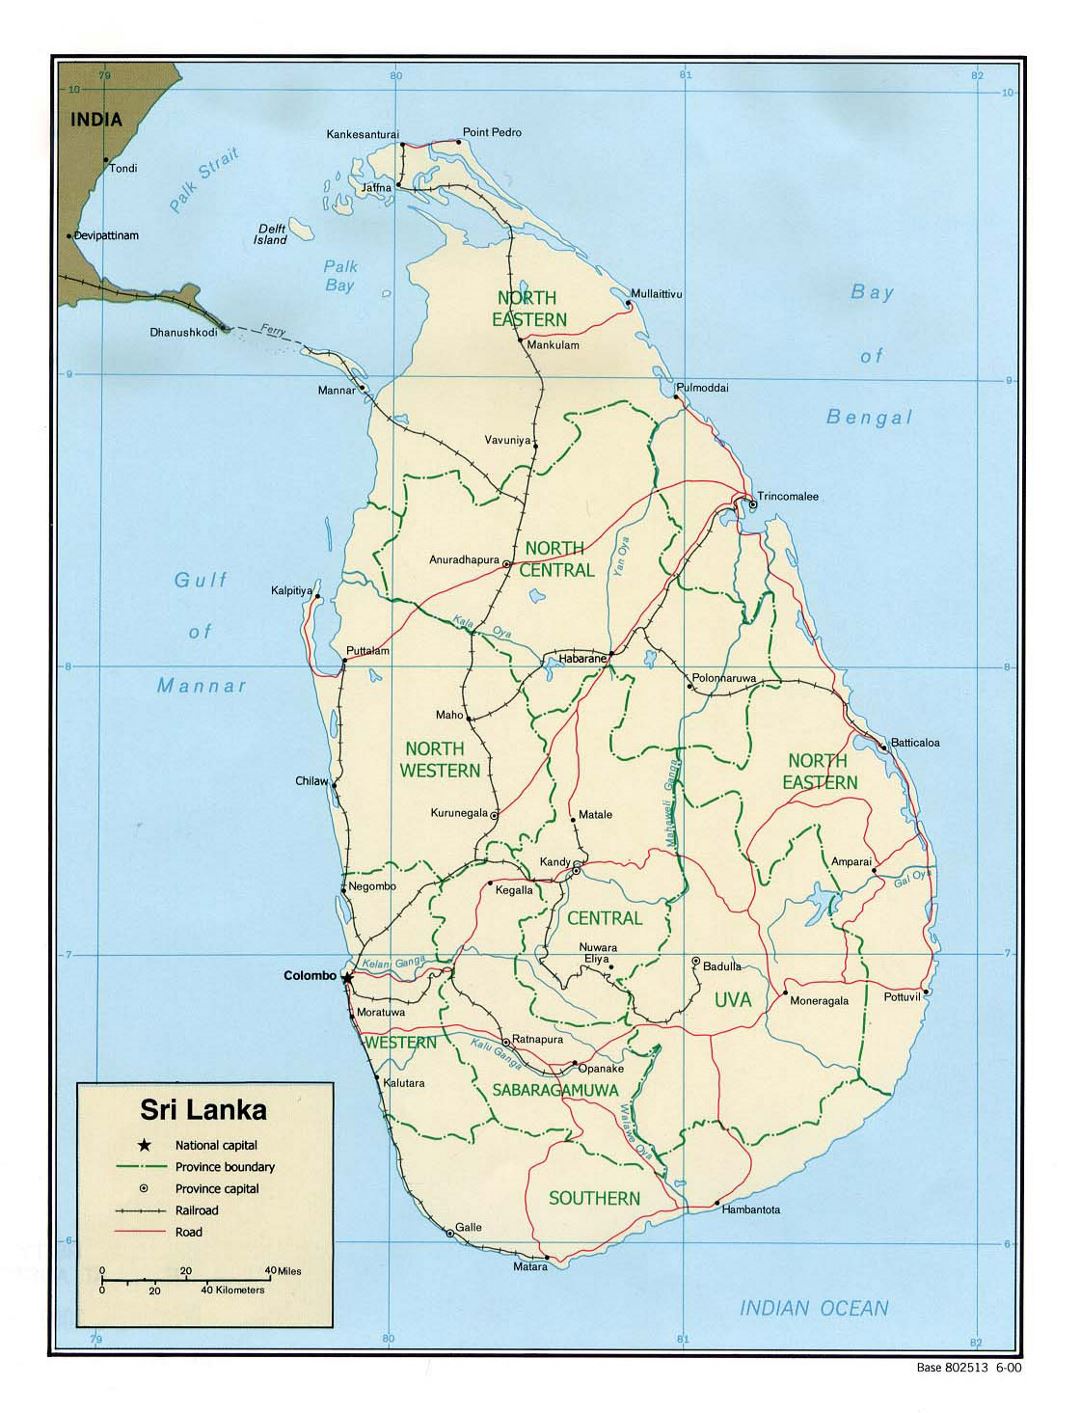 Detailed political and administrative map of Sri Lanka with roads, railroads and major cities - 2000